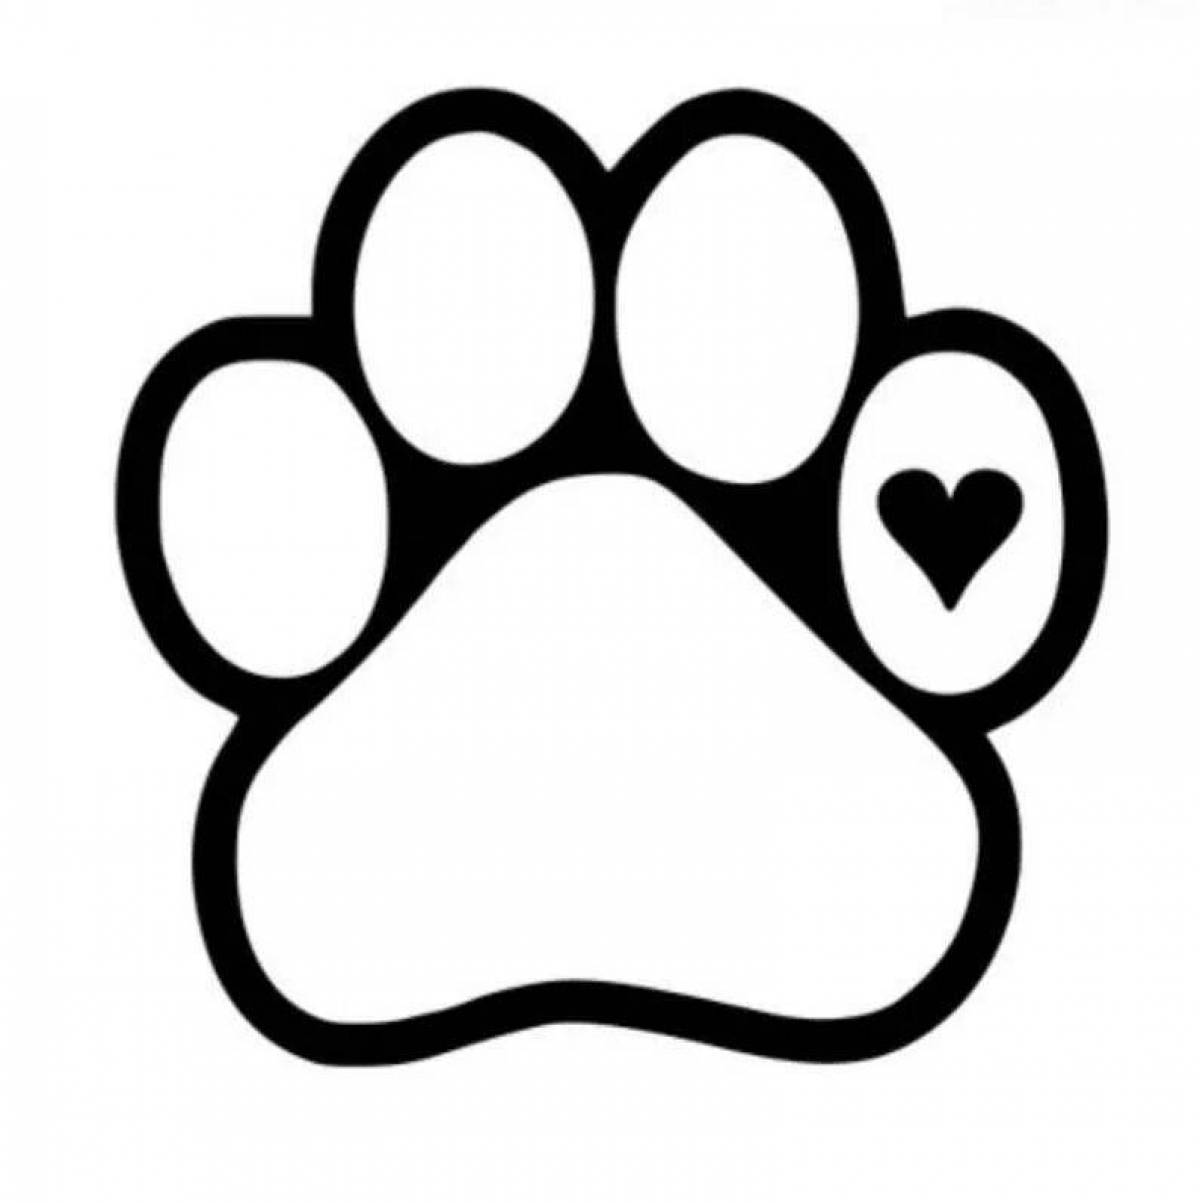 Coloring page gorgeous cat's paw